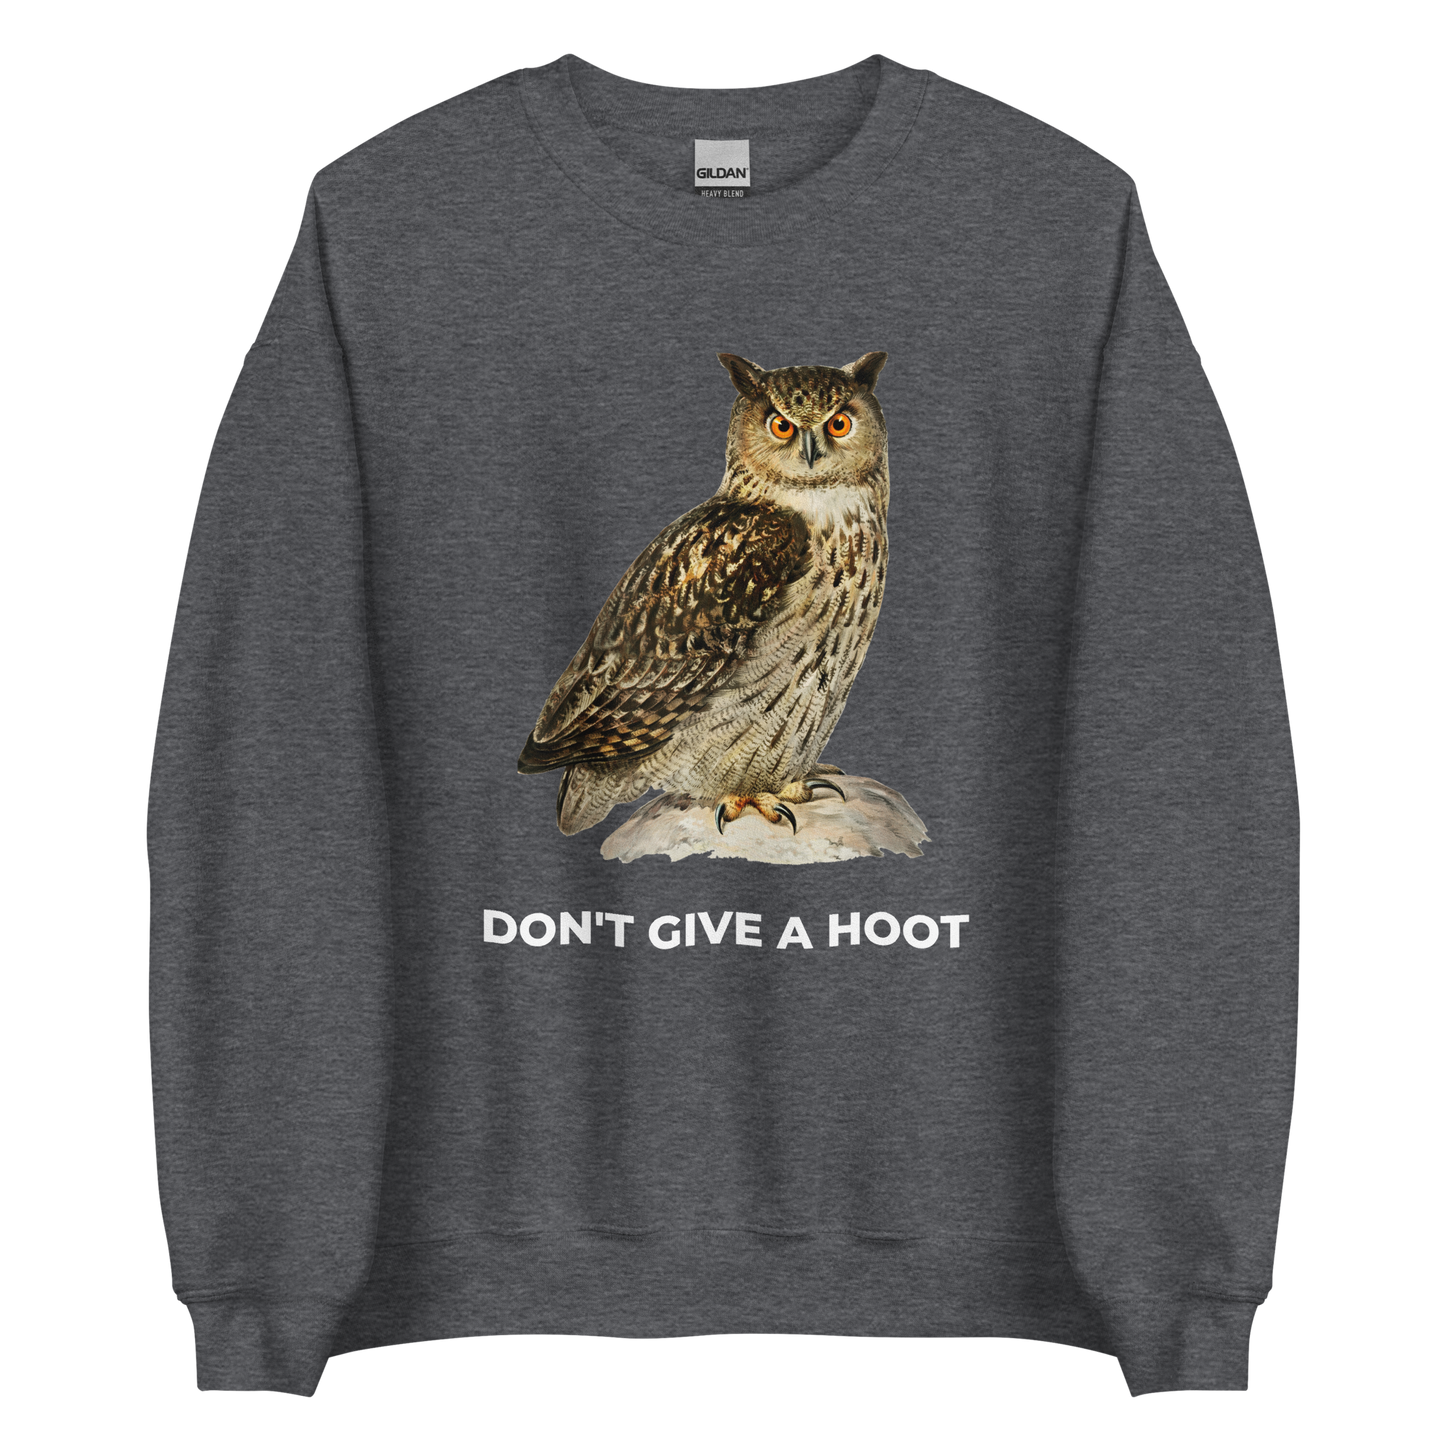 Dark Heather Owl Sweatshirt featuring a captivating Don't Give a Hoot graphic on the chest - Funny Graphic Owl Sweatshirts - Boozy Fox